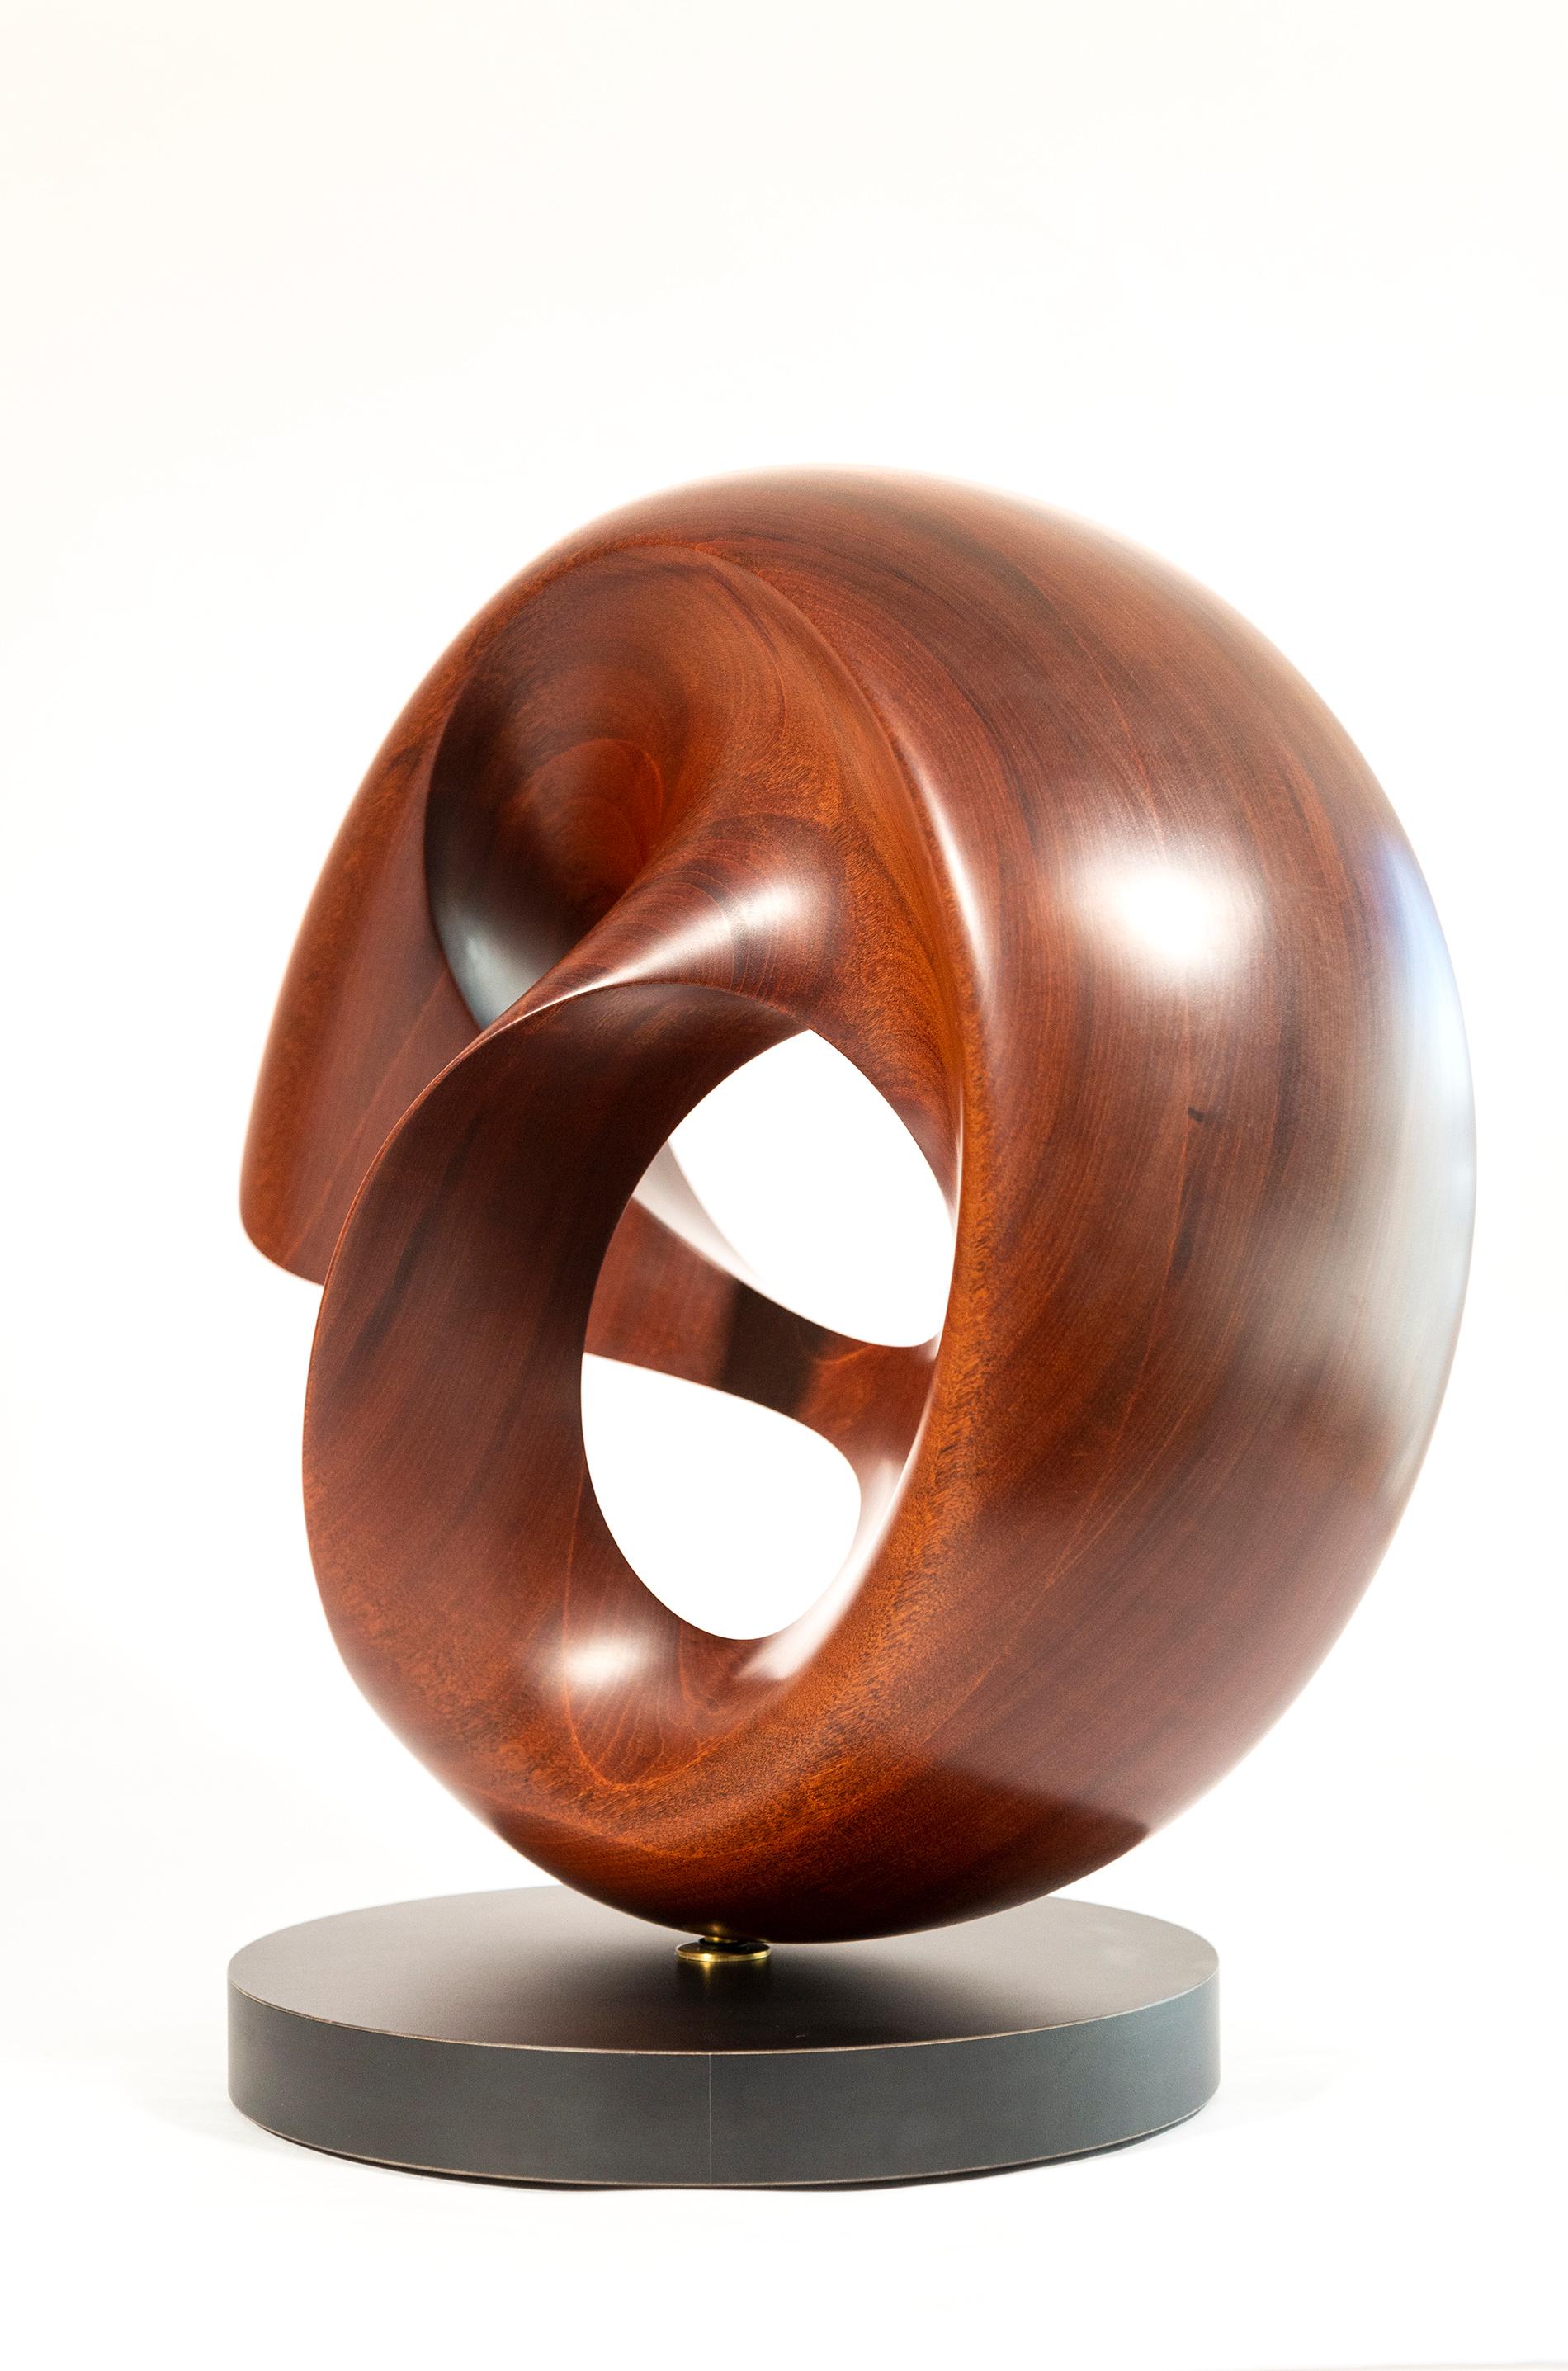 Fanfare - smooth, polished, abstract, contemporary, mahogany carved sculpture 1